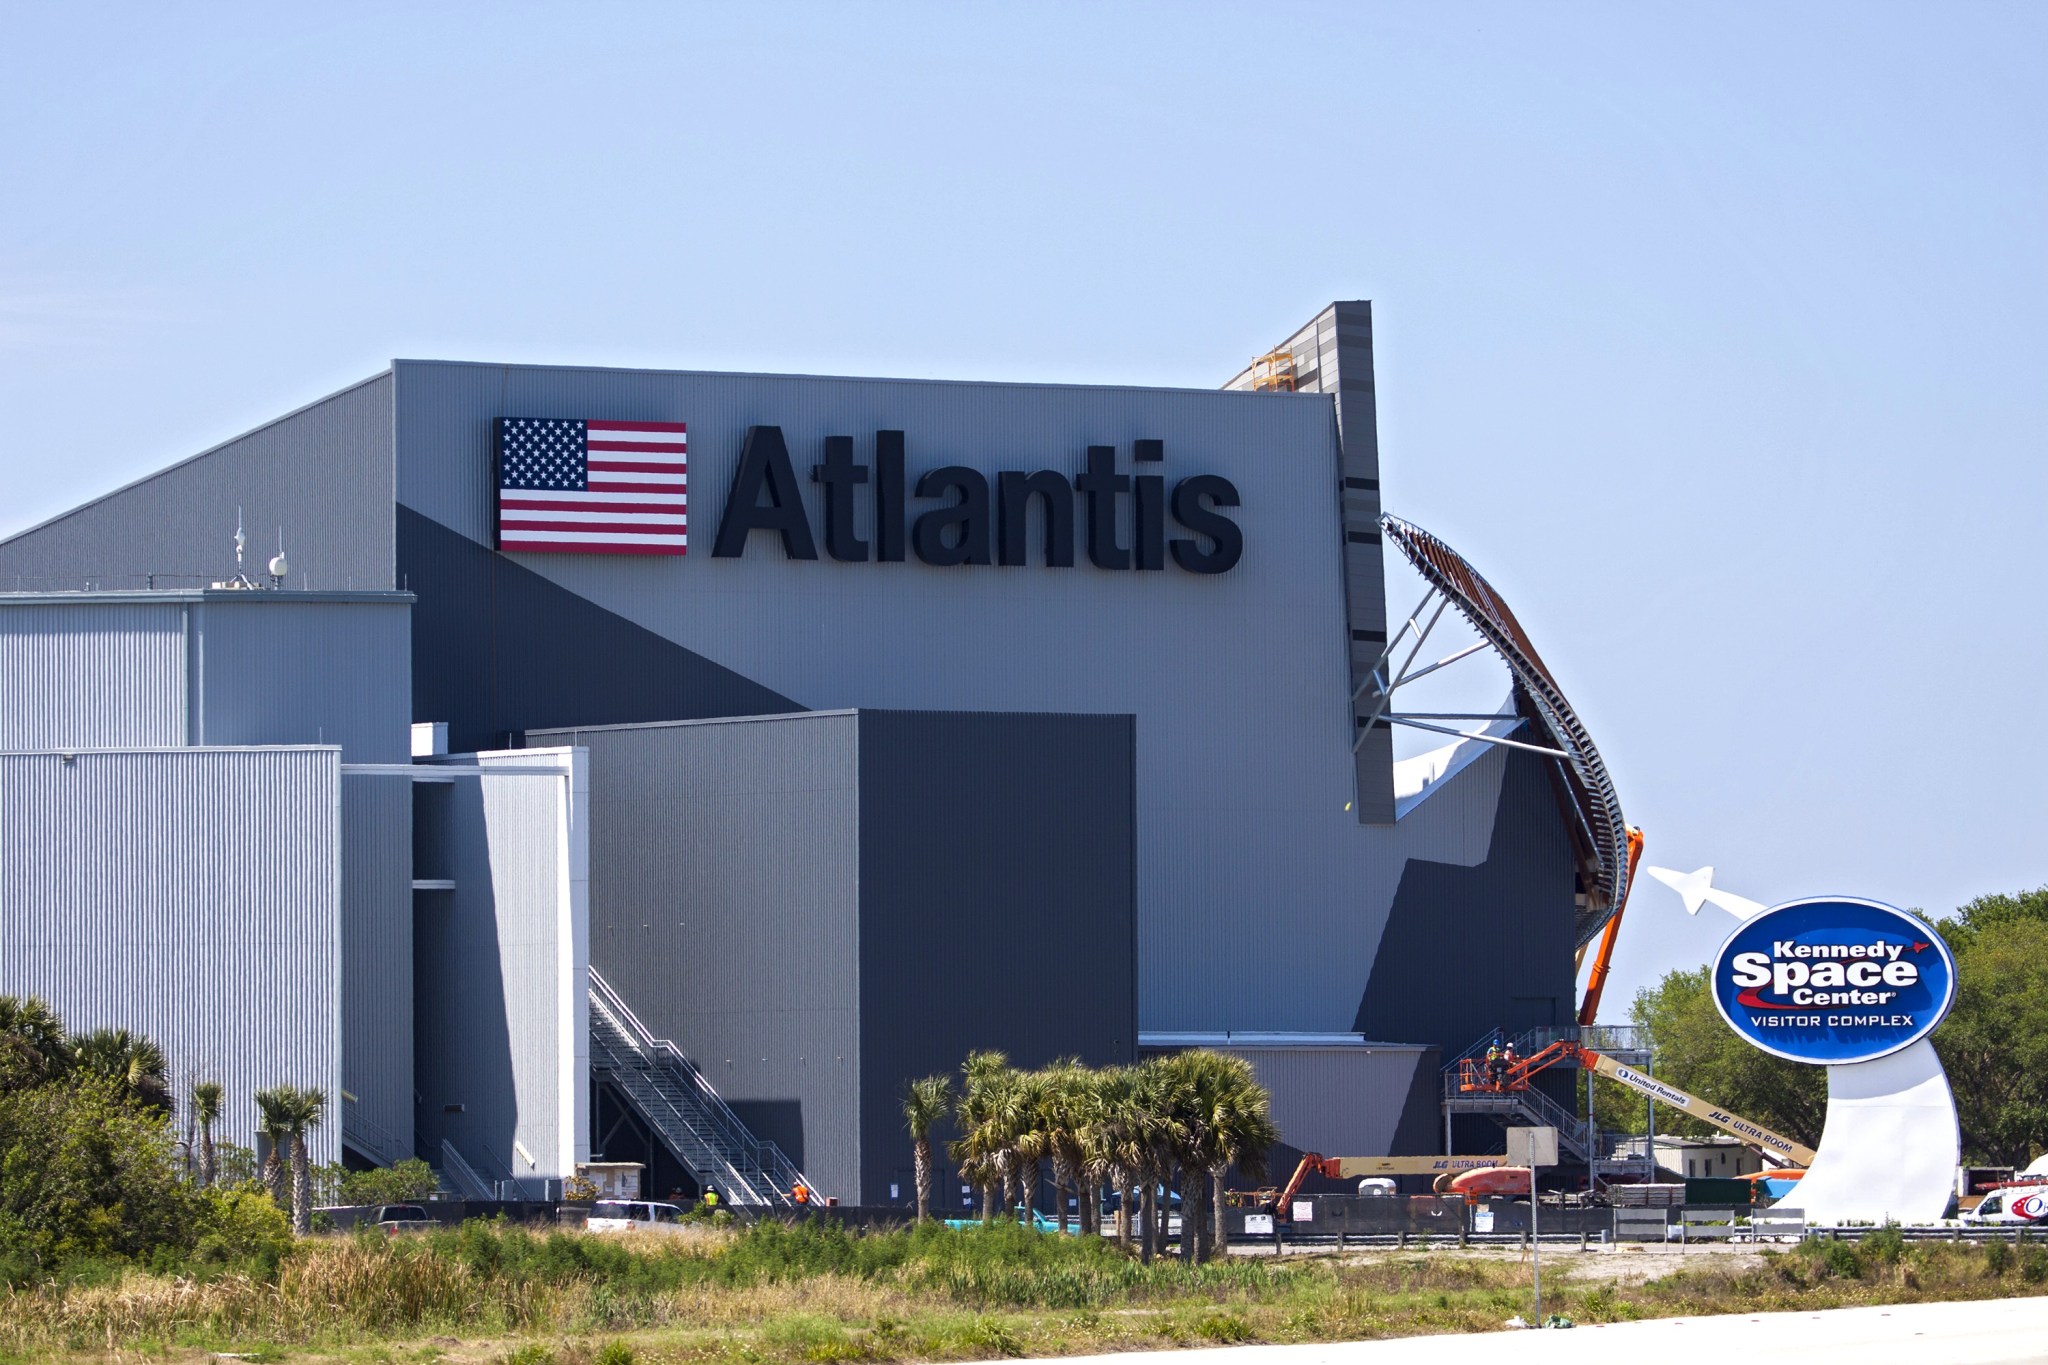 The Kennedy Space Center Visitor Complex has added the name "Atlantis" and American flag to the exterior of the "Space Shuttle Atlantis" exhibit.